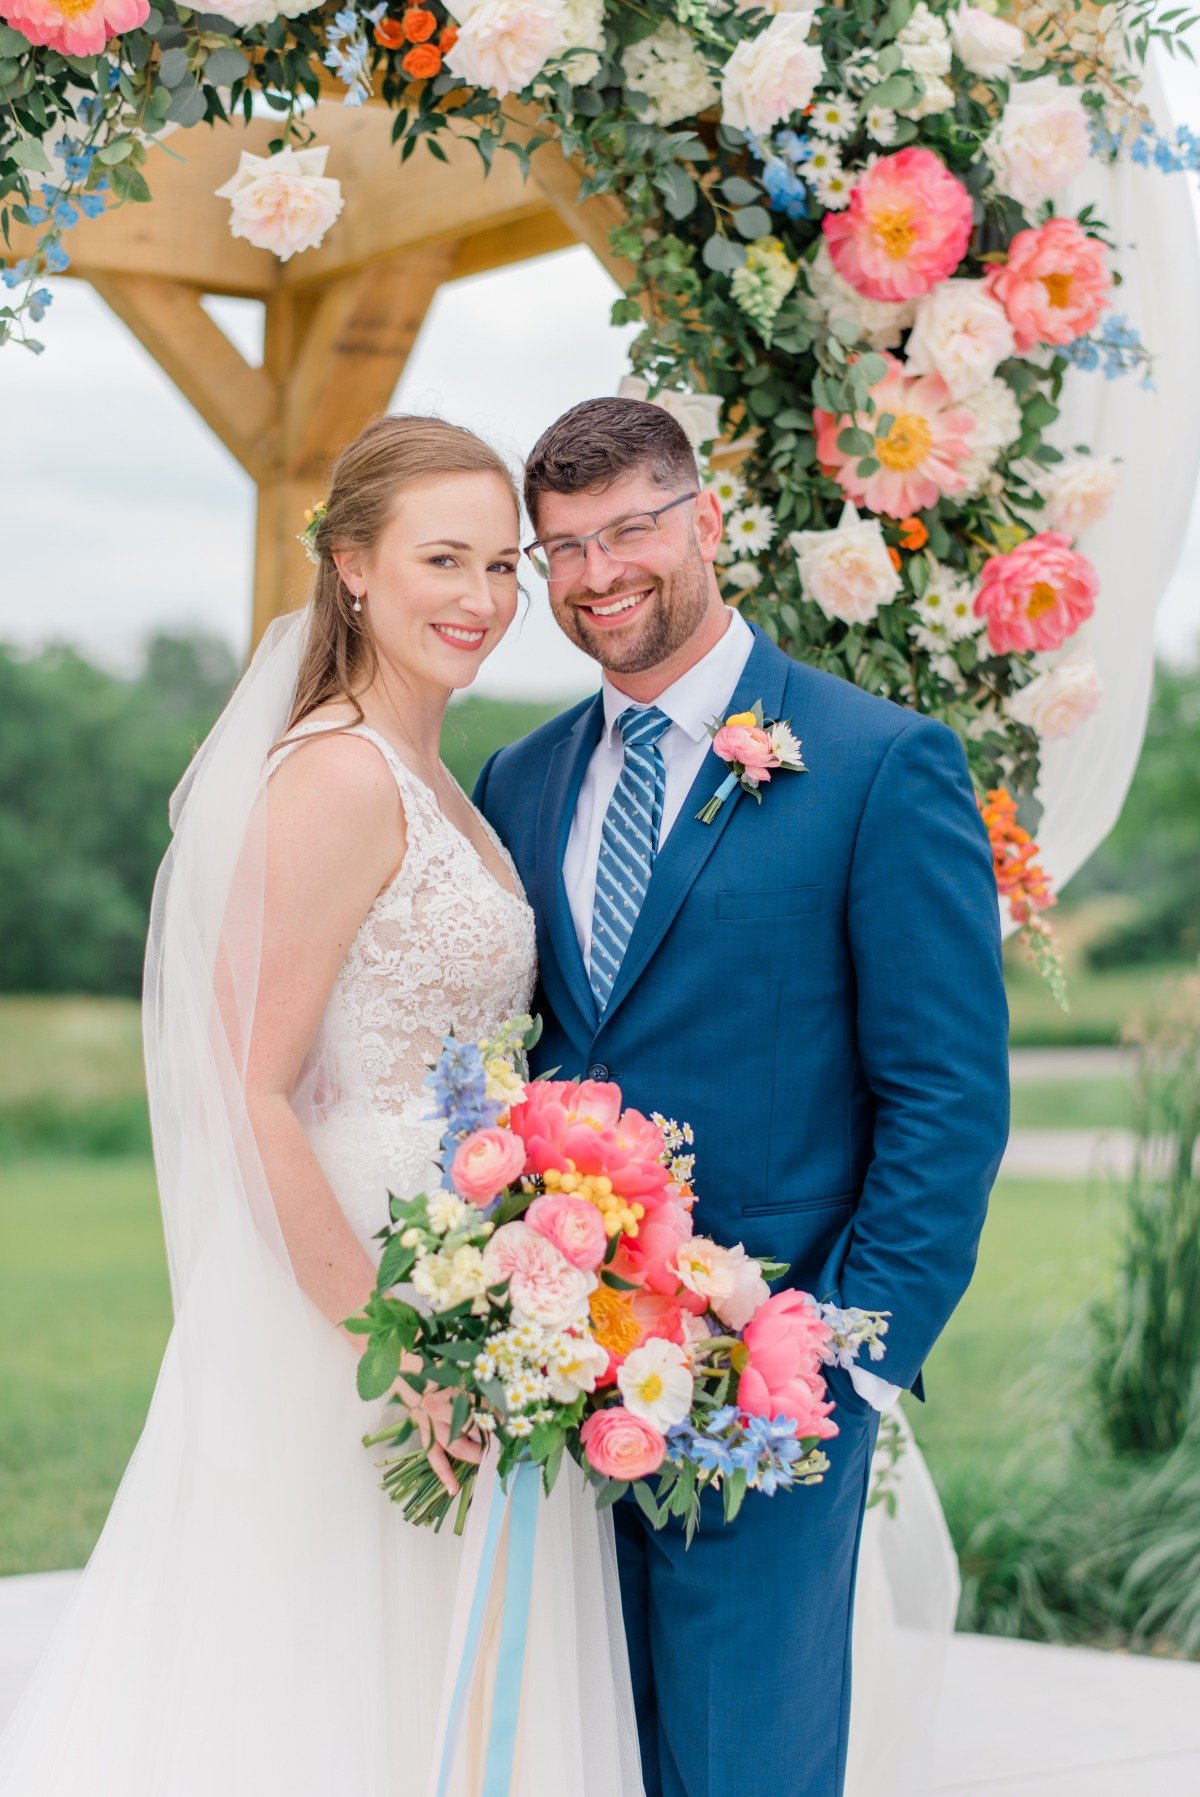 A Garden Wedding At The Wilds In Bloomington, IN